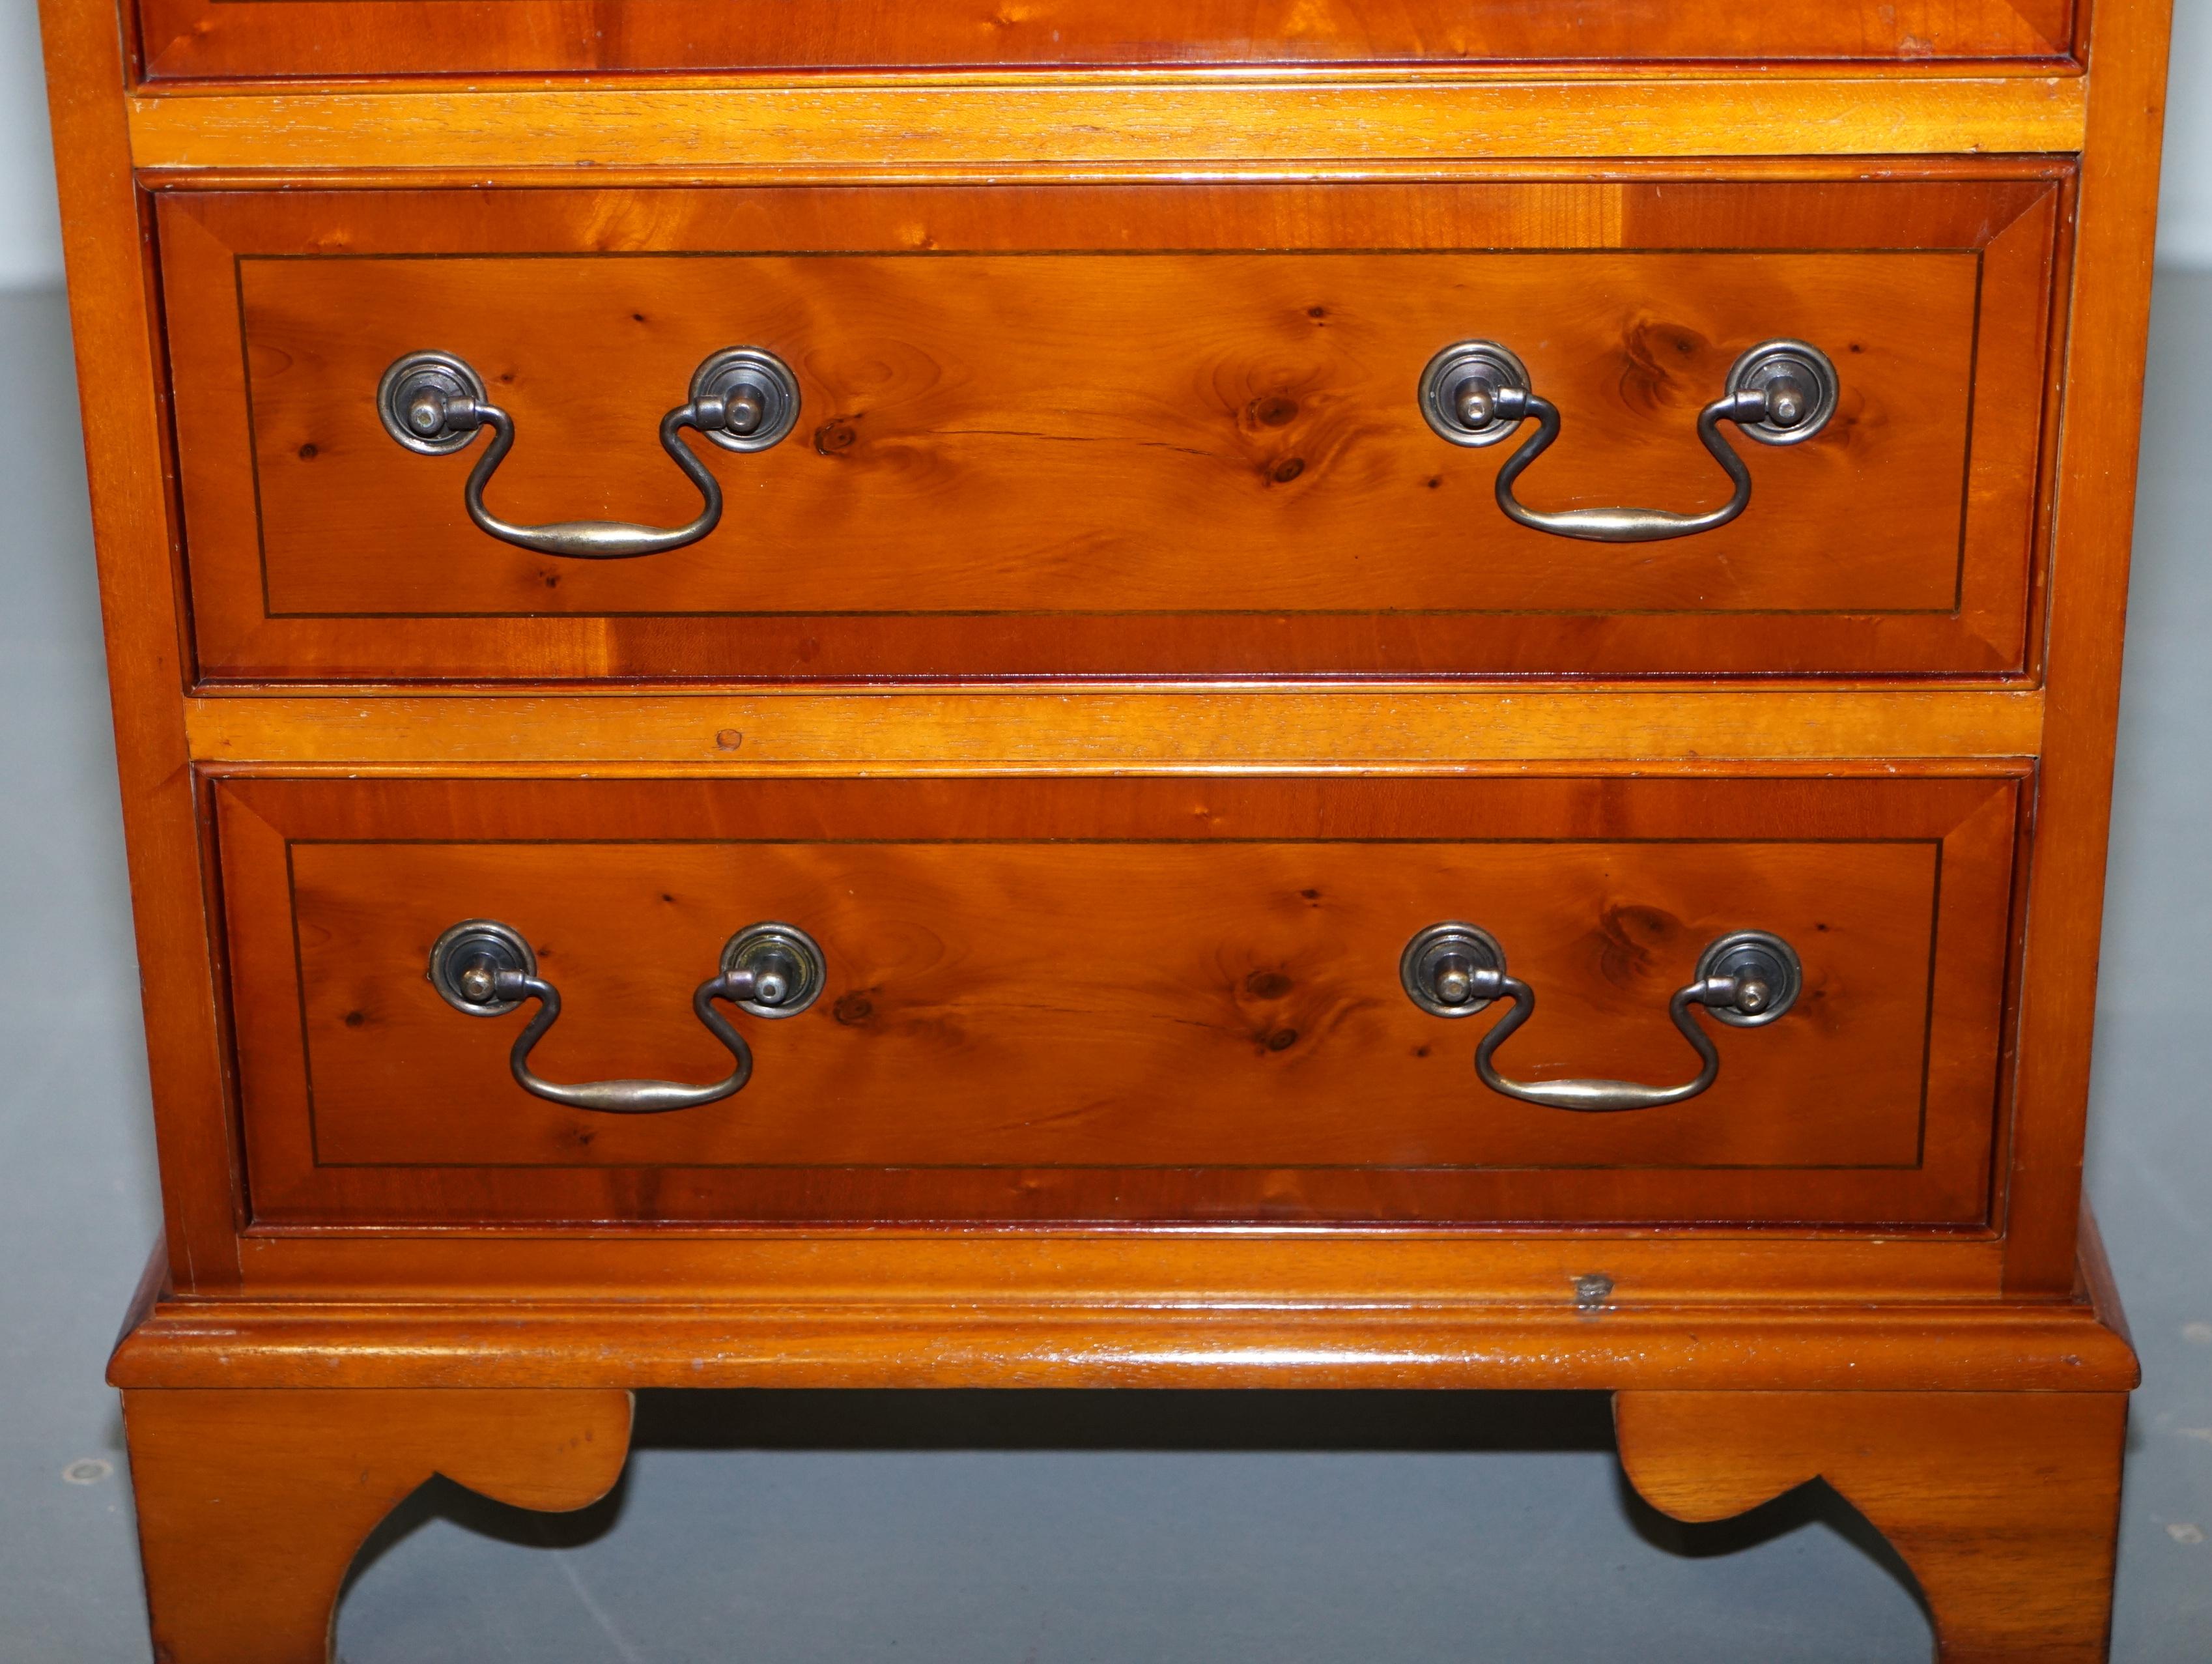 Small Burr Yew Wood Side Table Sized Chest of Drawers Great for Office Home Bed 2